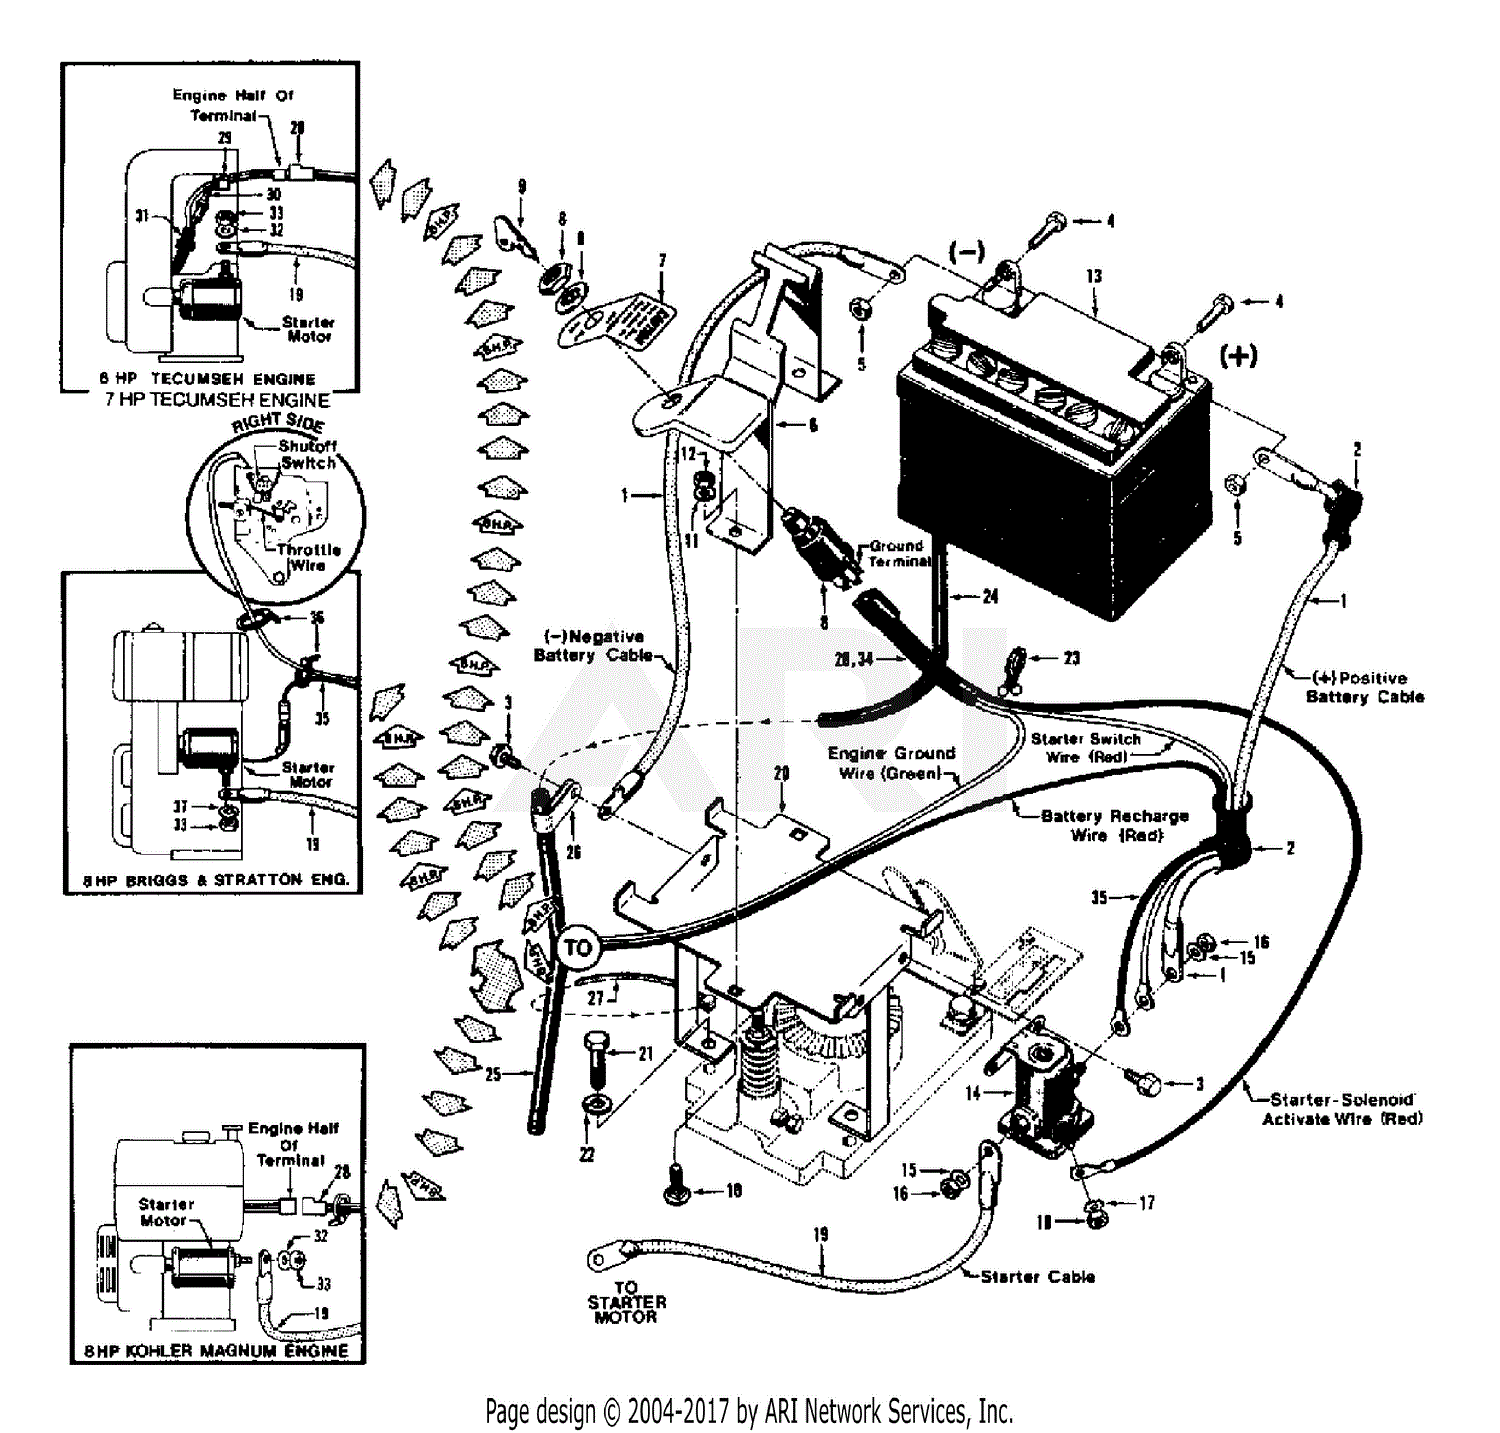 Diagram Based Mercury Electric Start Wiring Diagram Completed